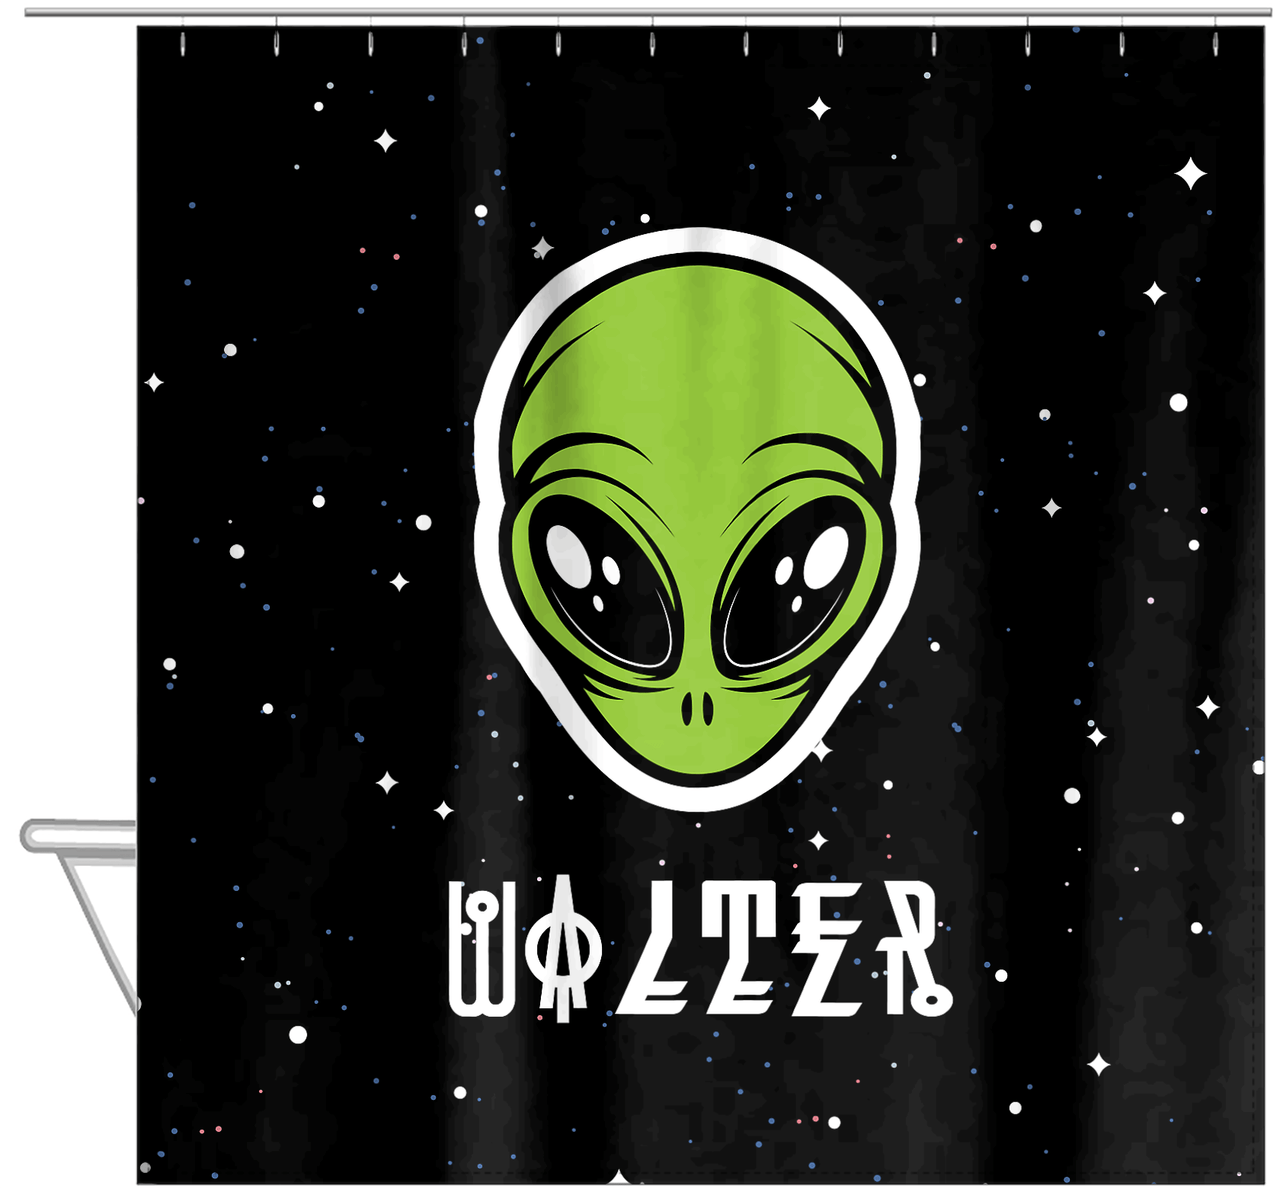 Personalized Aliens / UFO Shower Curtain - Black Background - Hanging View